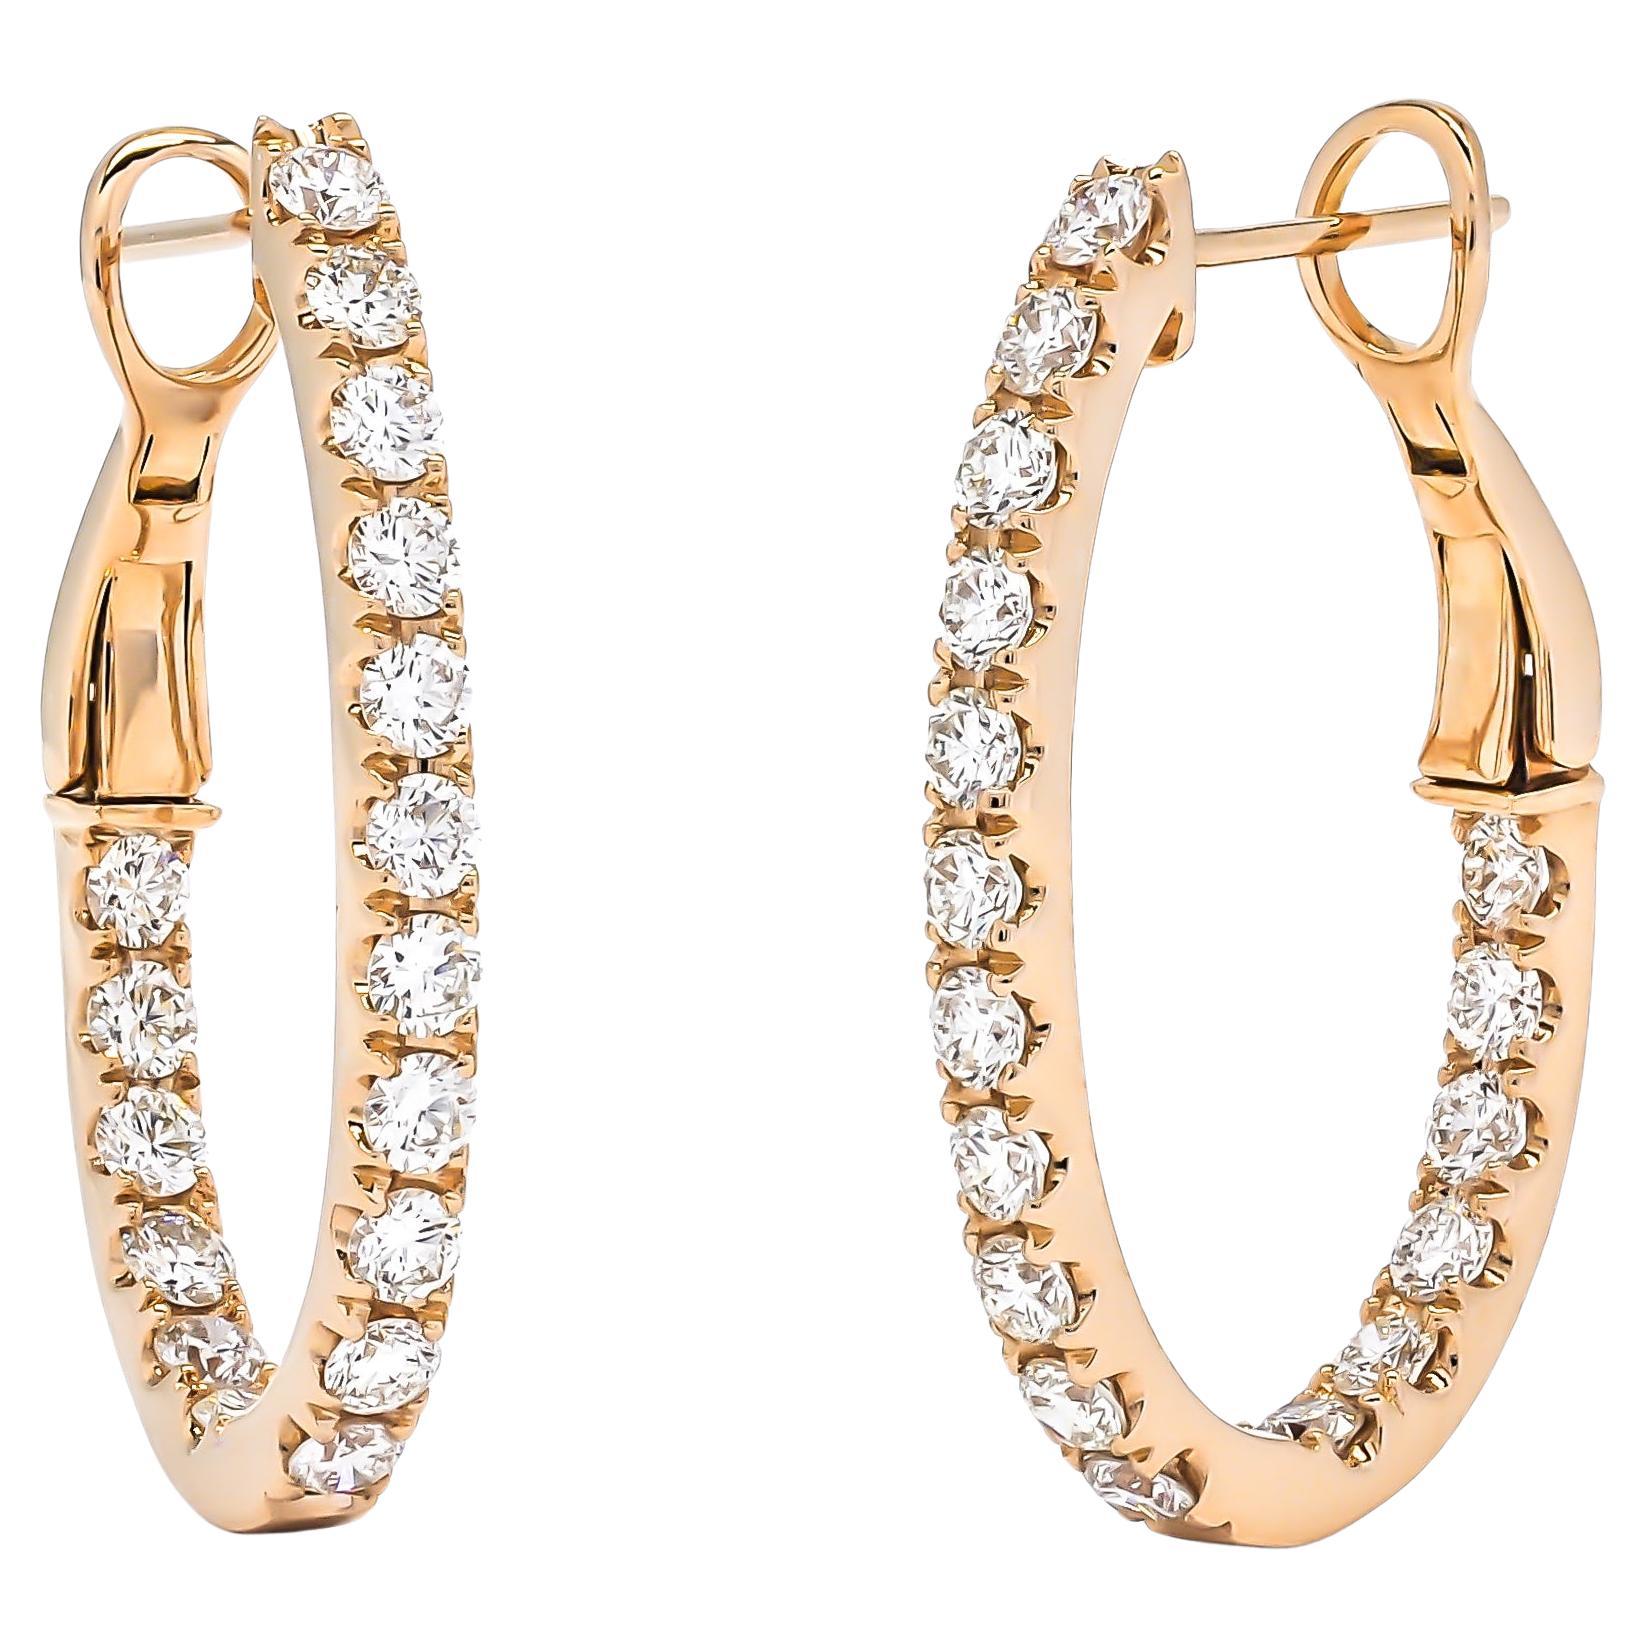 Natural Diamond 1.60 carats 18KT Rose Gold 'In and out' Hoop Earrings 